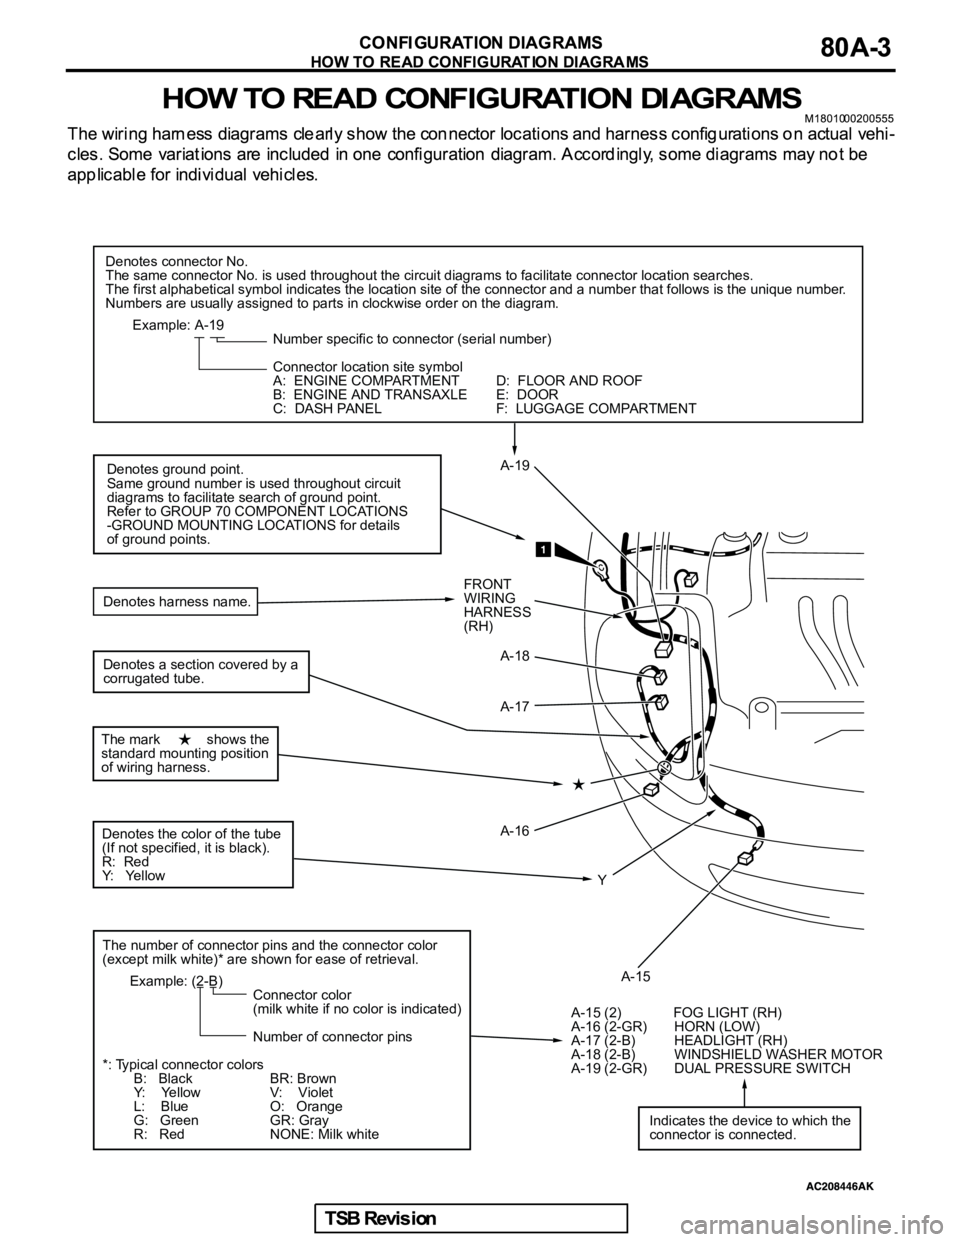 MITSUBISHI GALANT 2005  Service Repair Manual Denotes connector No.
The same connector No. is used throughout the circuit diagrams to facilitate connector location searches.
The first alphabetical symbol indicates the location site of the connect